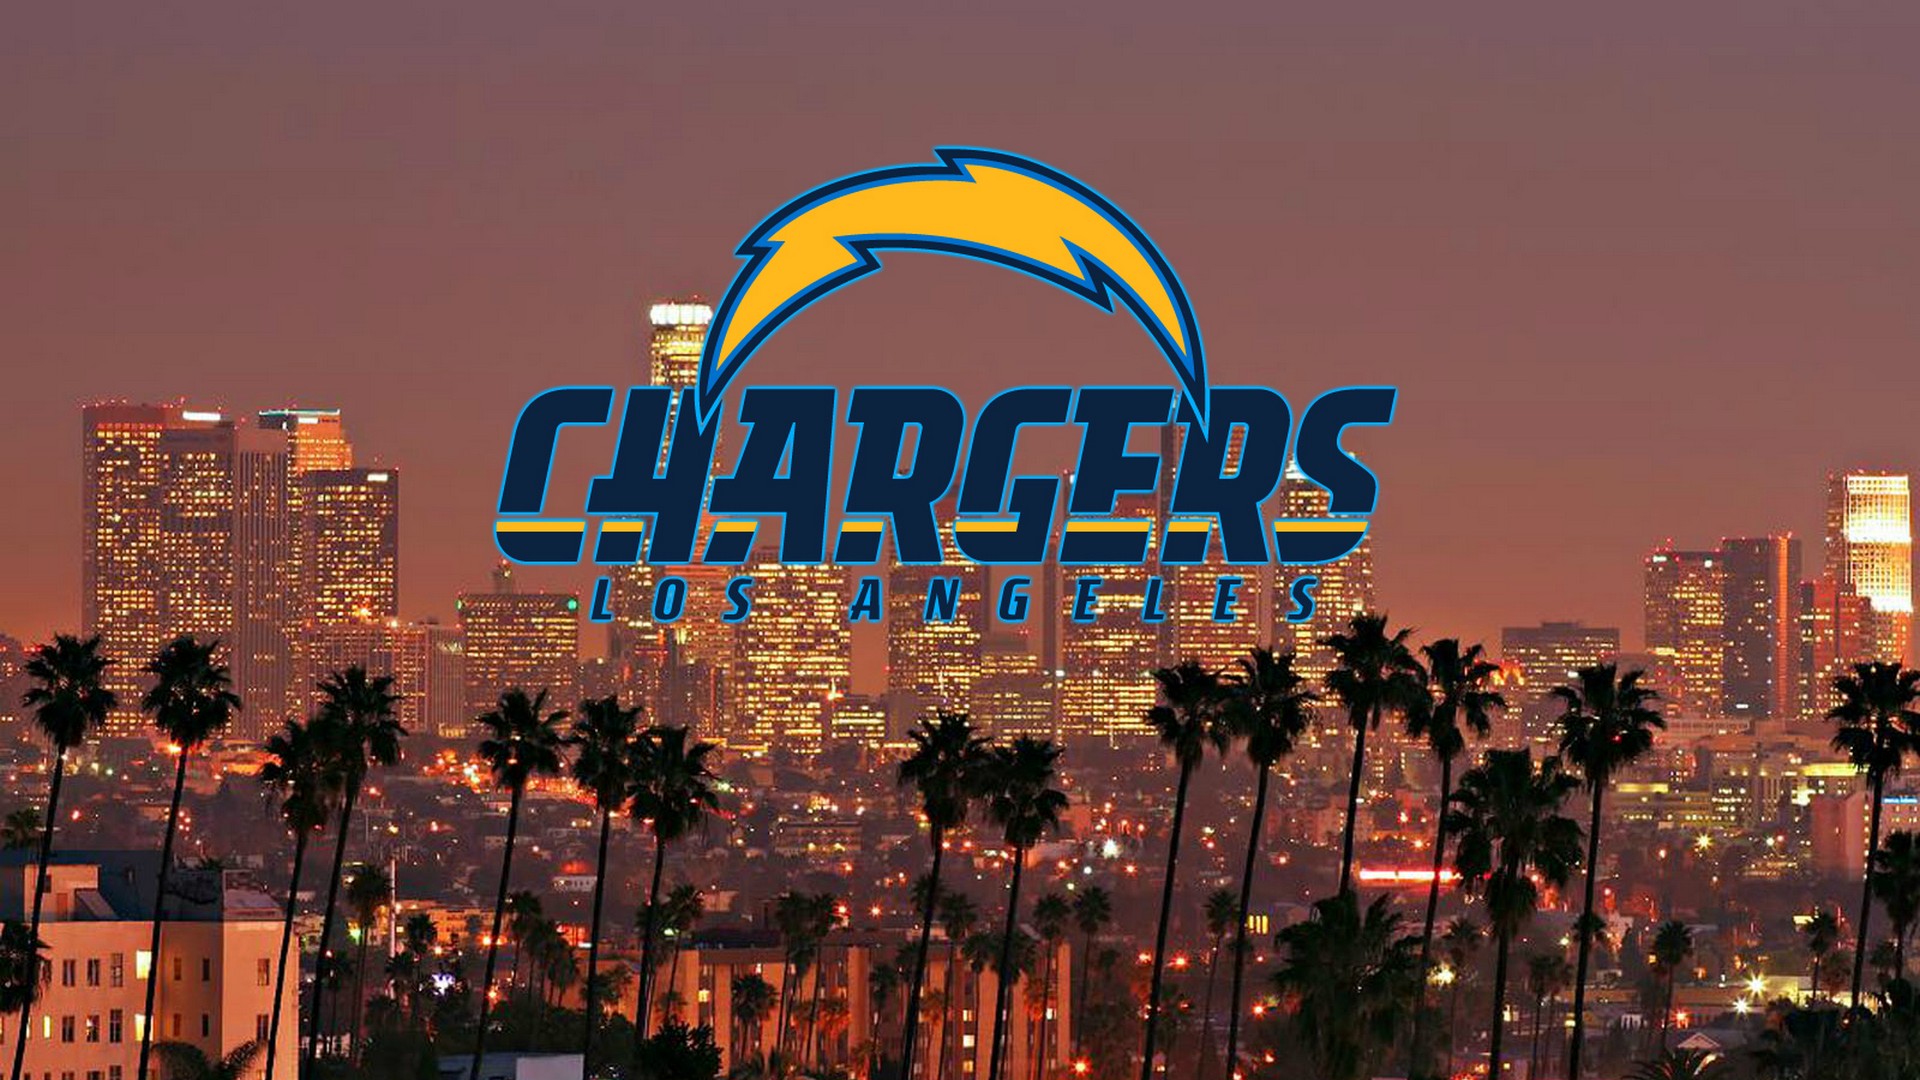 HD Desktop Wallpaper Los Angeles Chargers with resolution 1920x1080 pixel. You can make this wallpaper for your Mac or Windows Desktop Background, iPhone, Android or Tablet and another Smartphone device